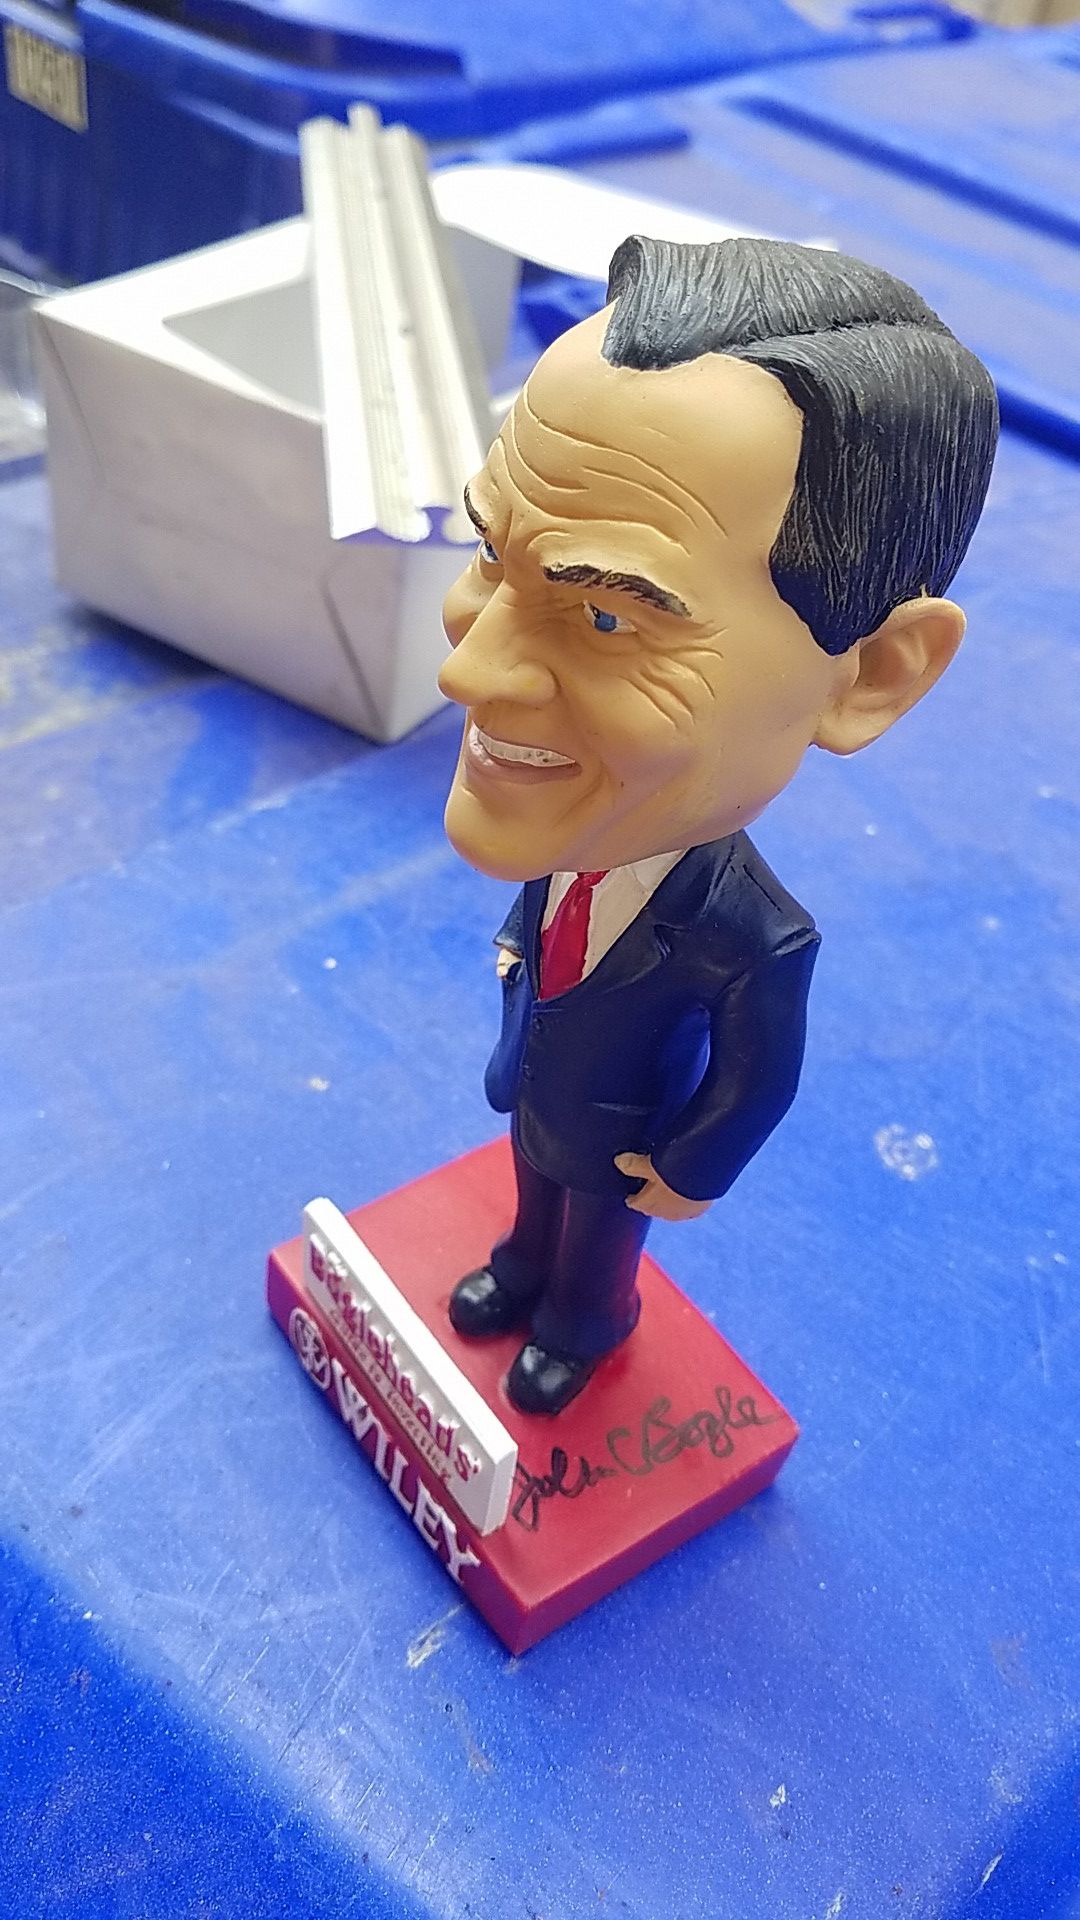 Boot Powell Bobble Head for Sale in Beacon Falls, CT - OfferUp